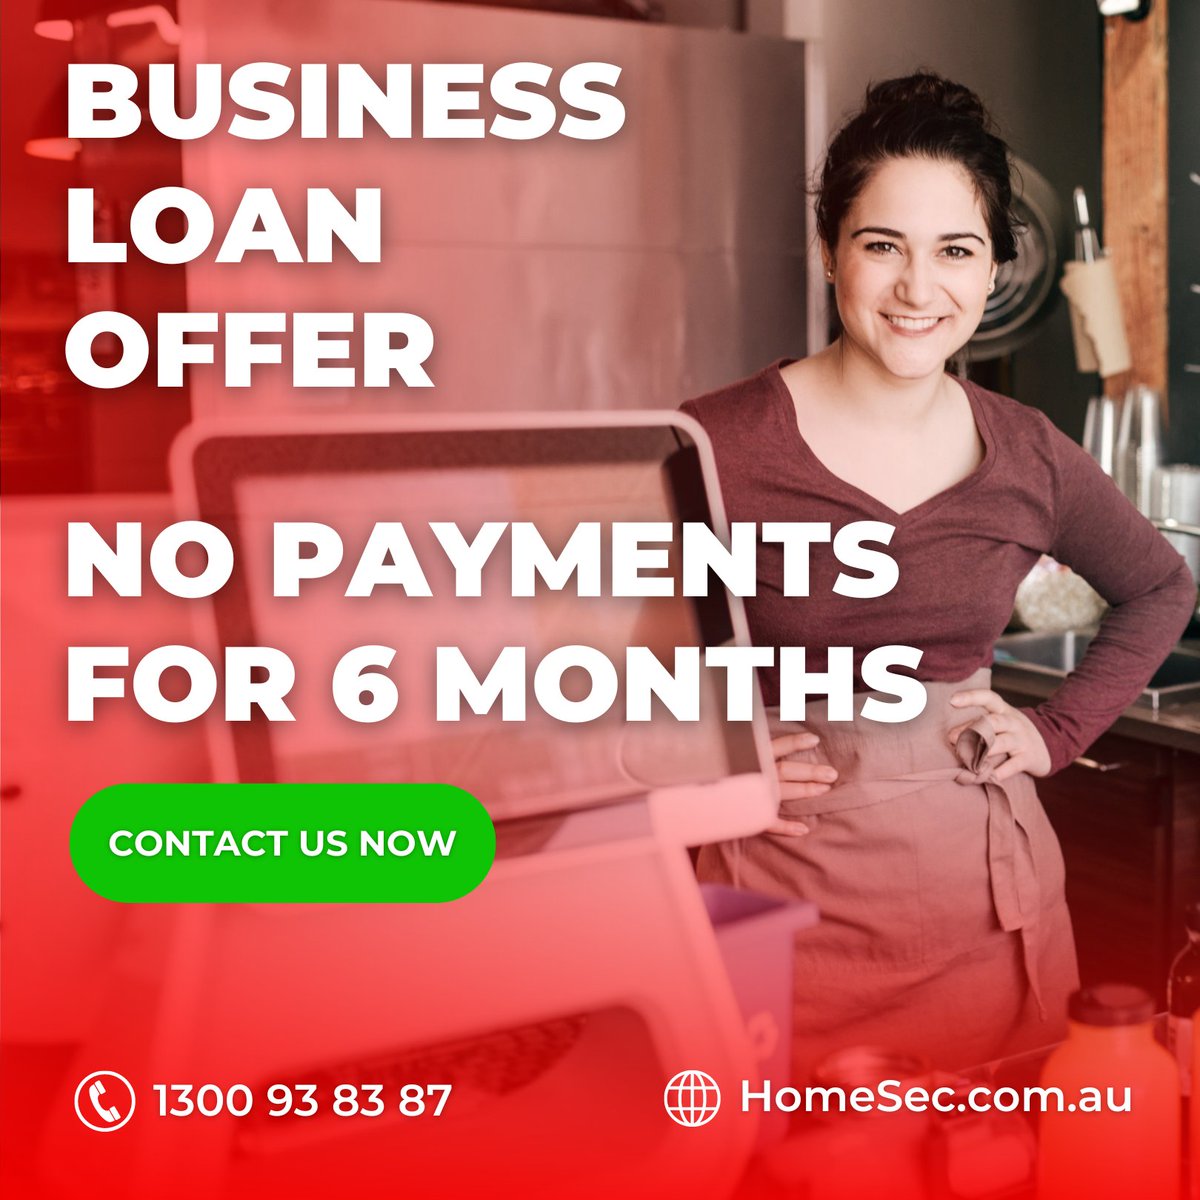 👌 NO PAYMENTS for up to 6 Months. This offer has become a massive winner for business owners.

Learn more:

📞 1300 93 83 87

🌐 HomeSec.com.au

#businessloans #smeloans #commercialloans #businesslending